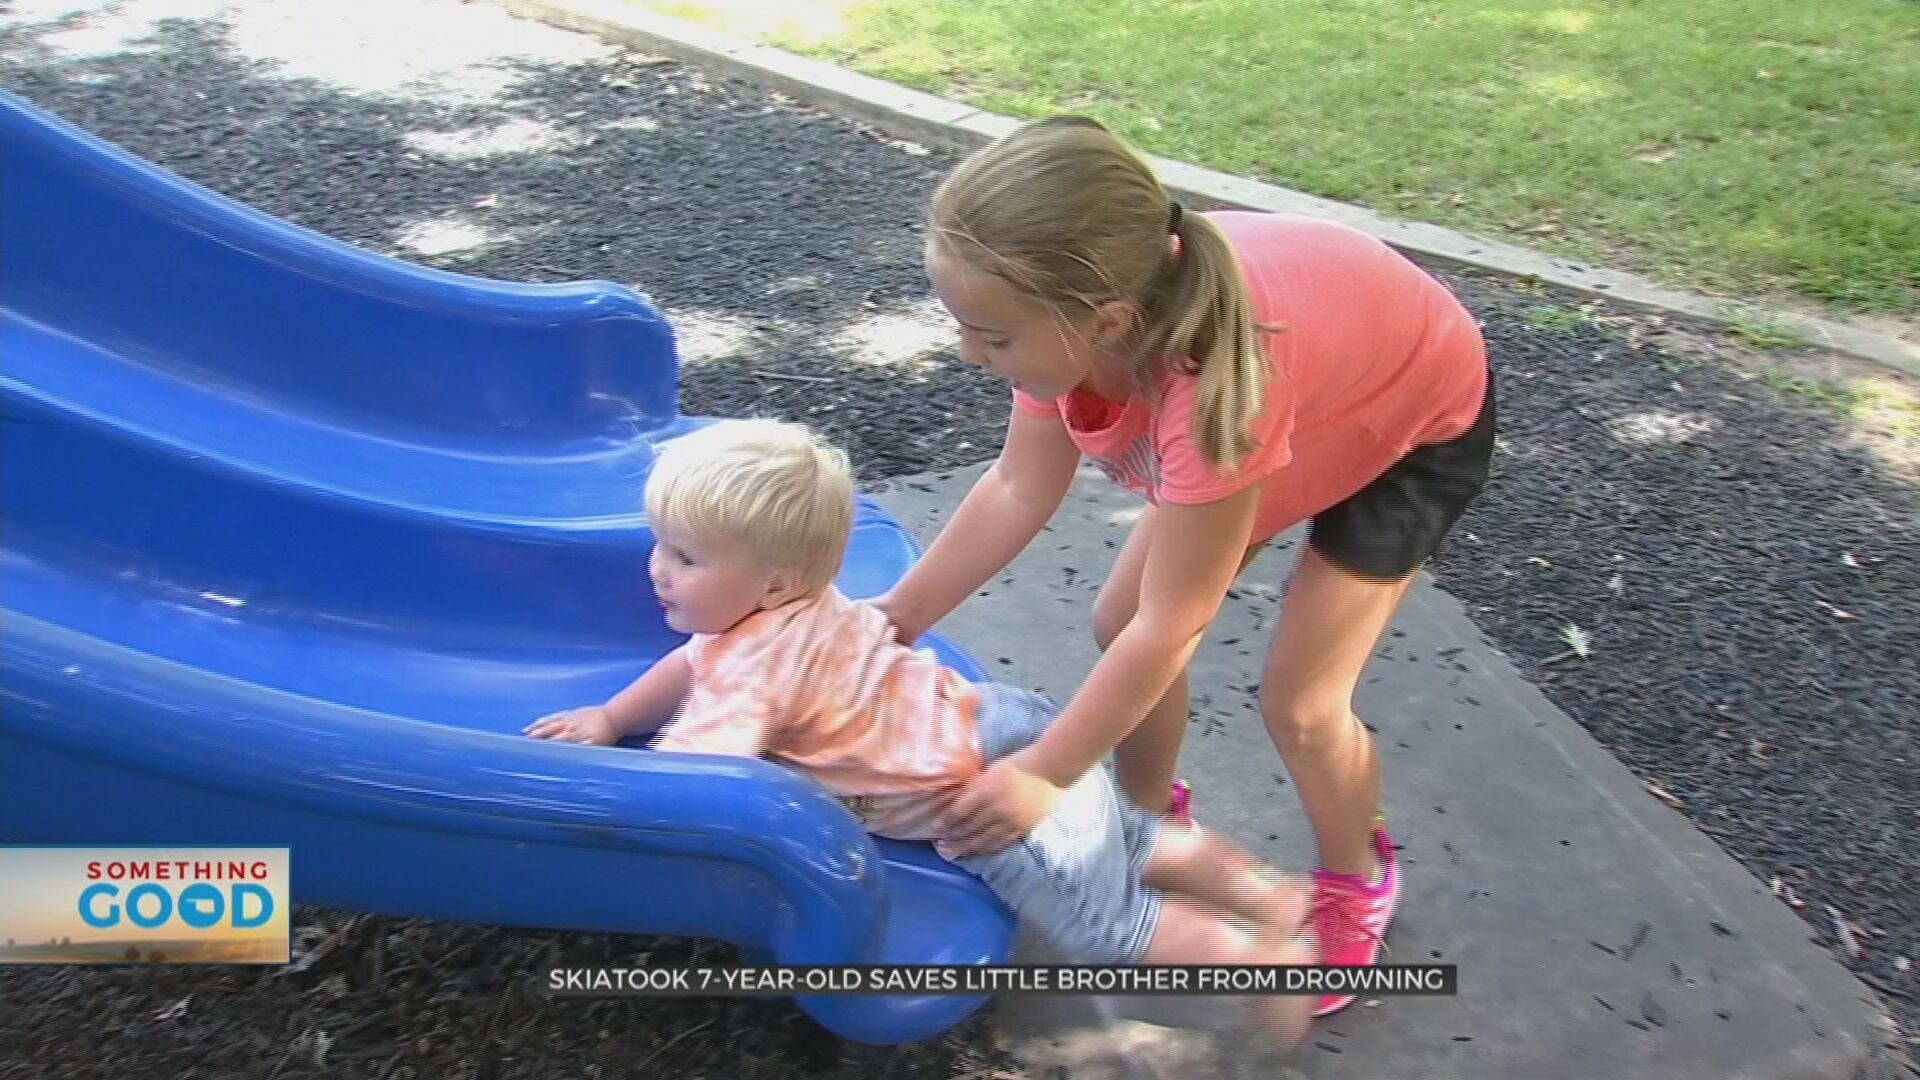 Skiatook 7-Year-Old Saves Little Brother From Drowning